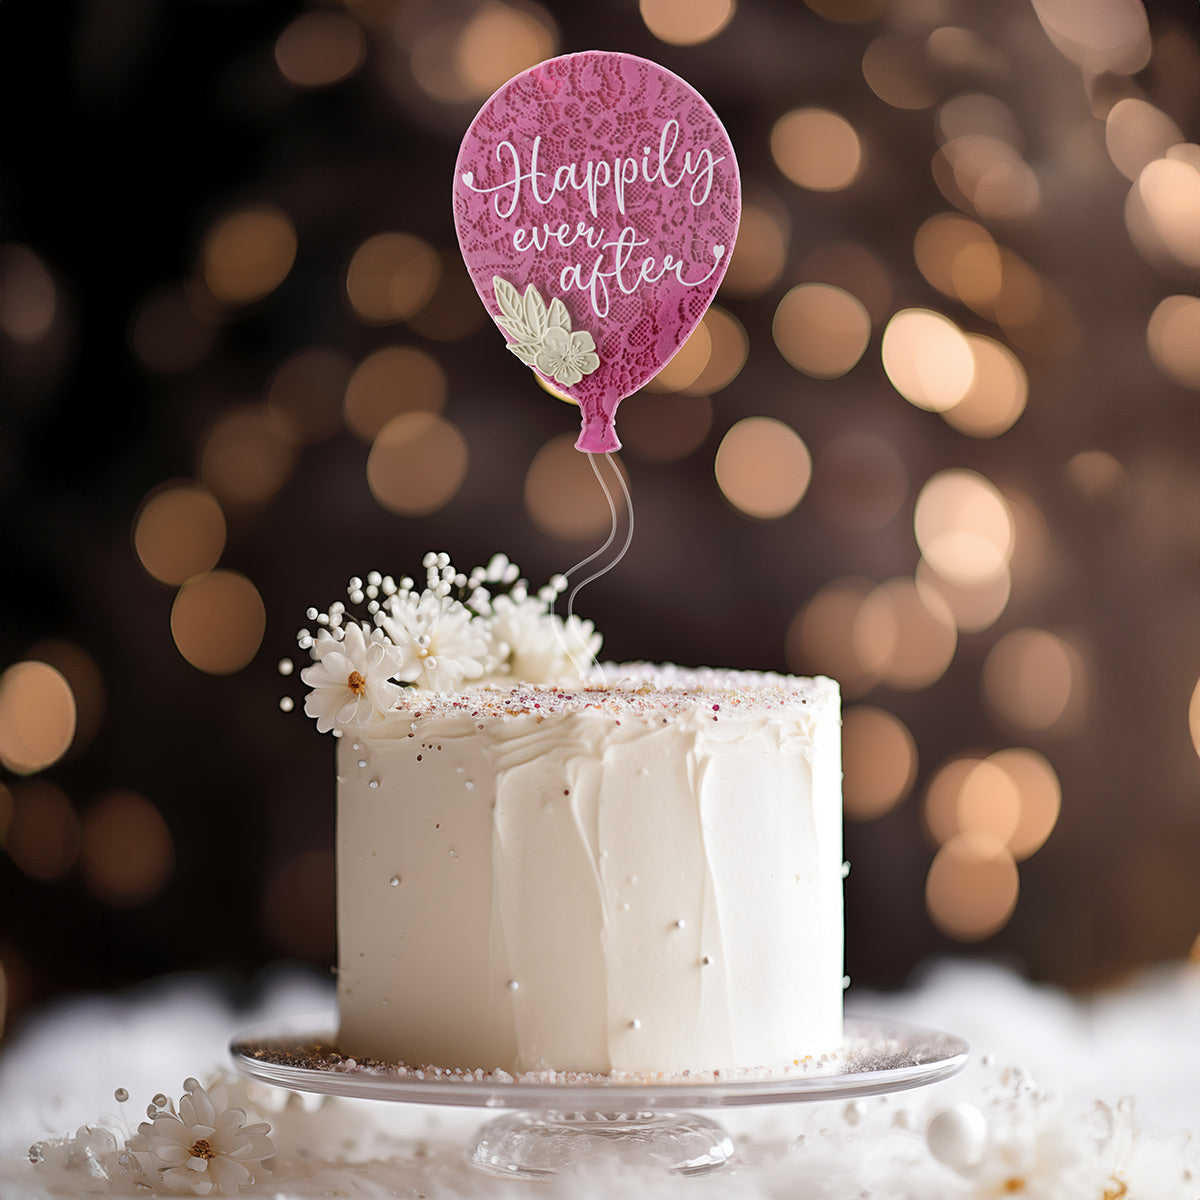 Happily-Ever-After-Balloon-Cake-Topper-EOU-1.jpg__PID:8d907e17-2de7-4376-a8bb-b70f3923bcd9